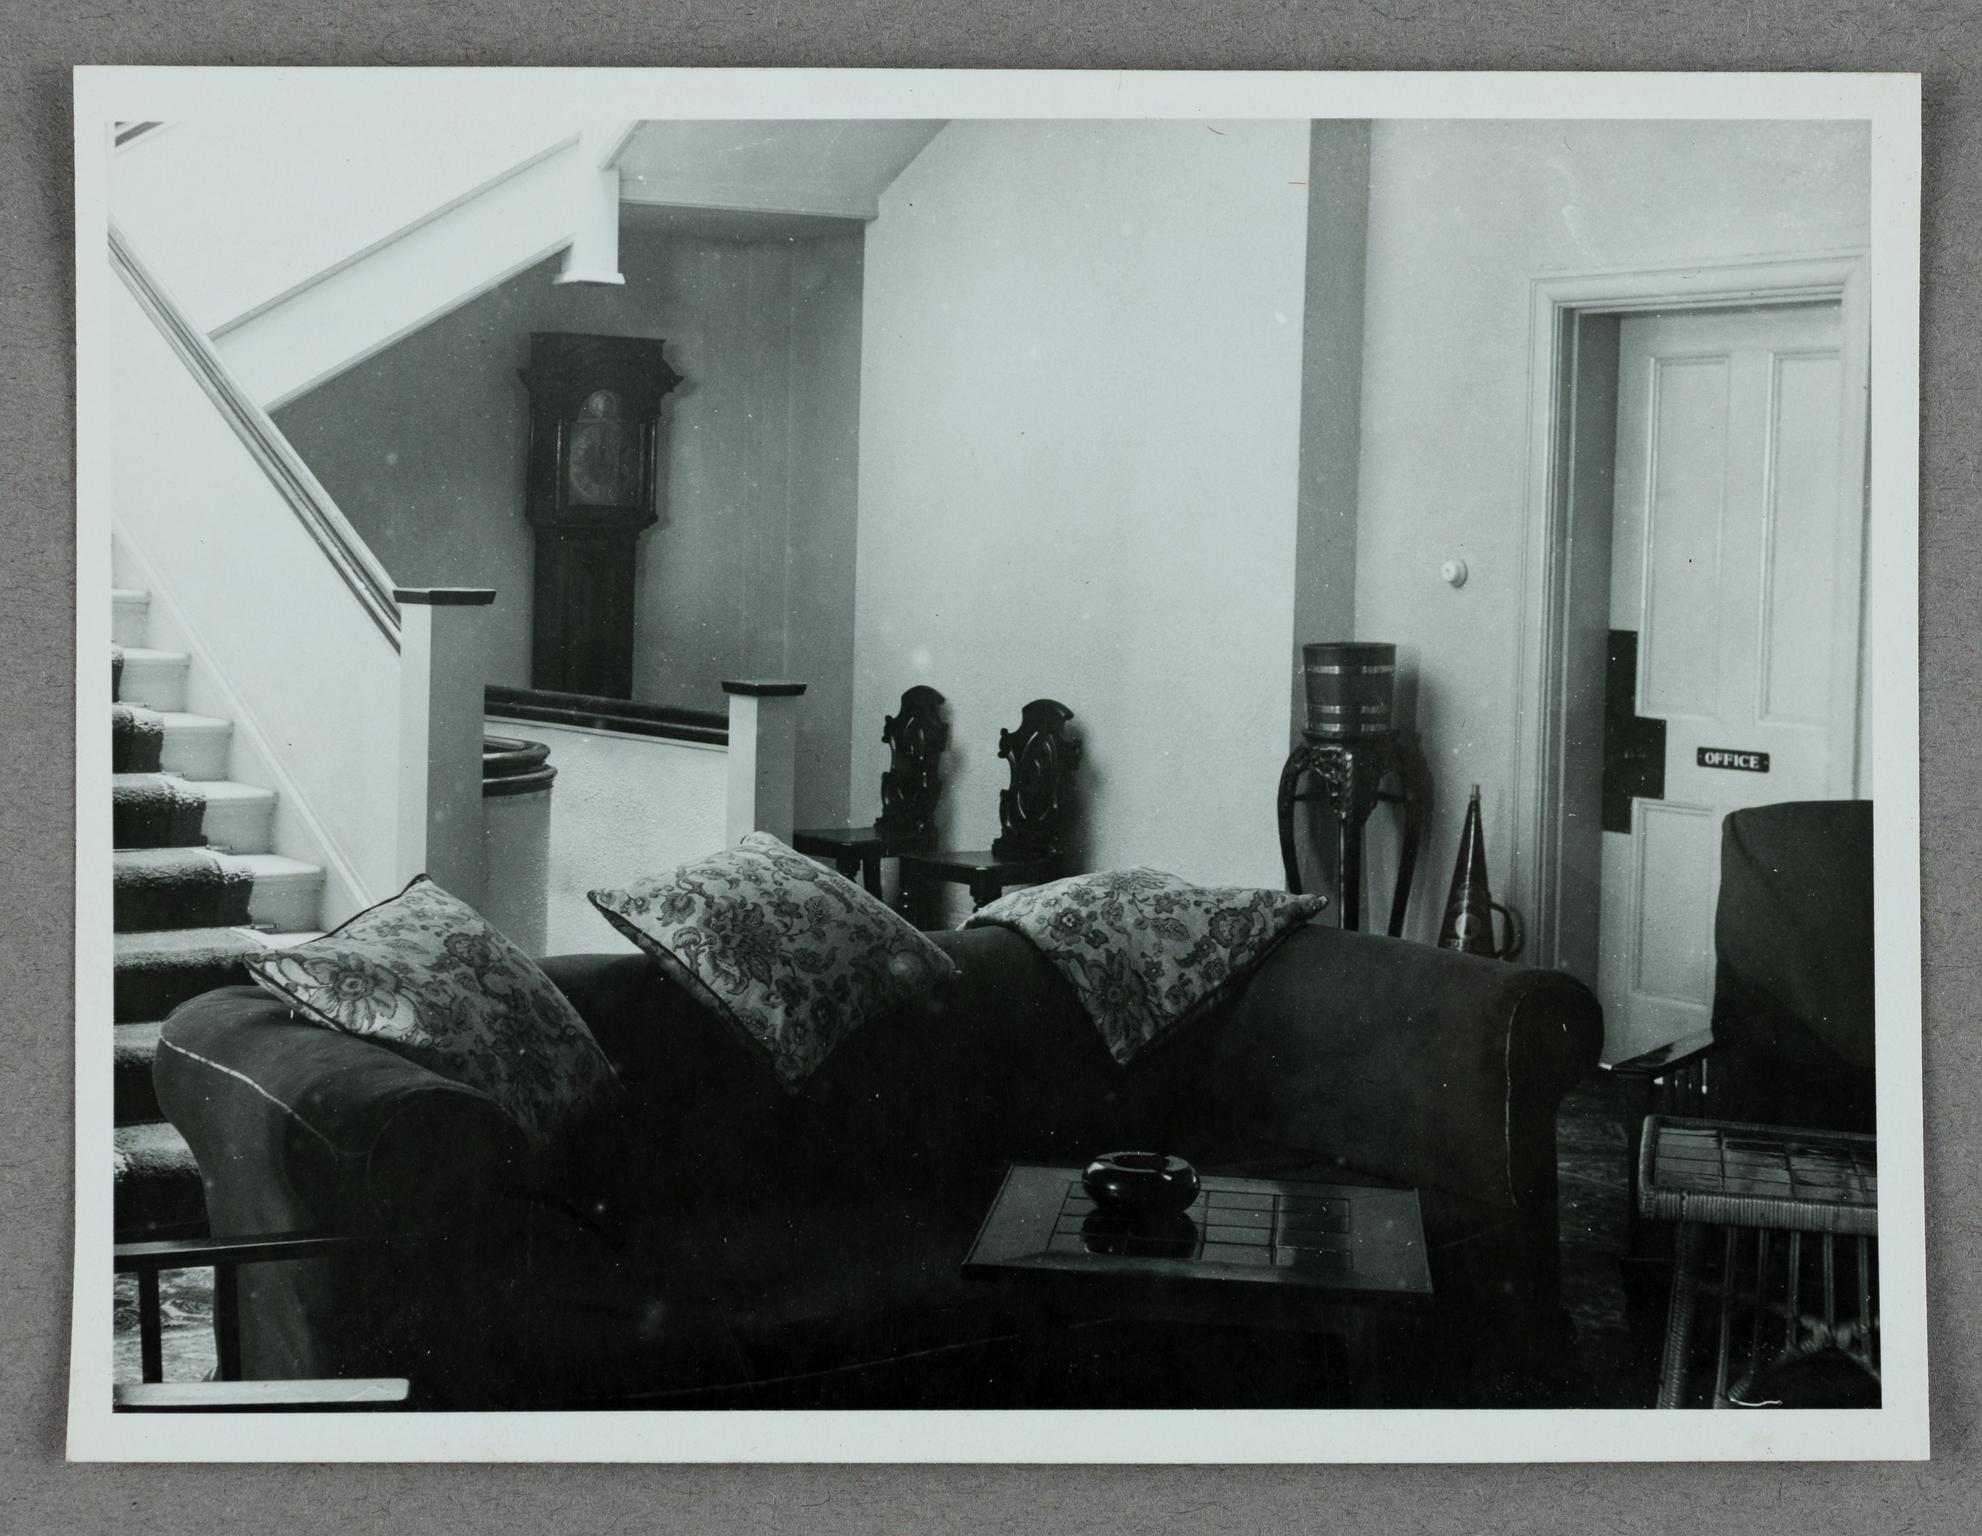 Court Royal miners' convalescent home, photograph